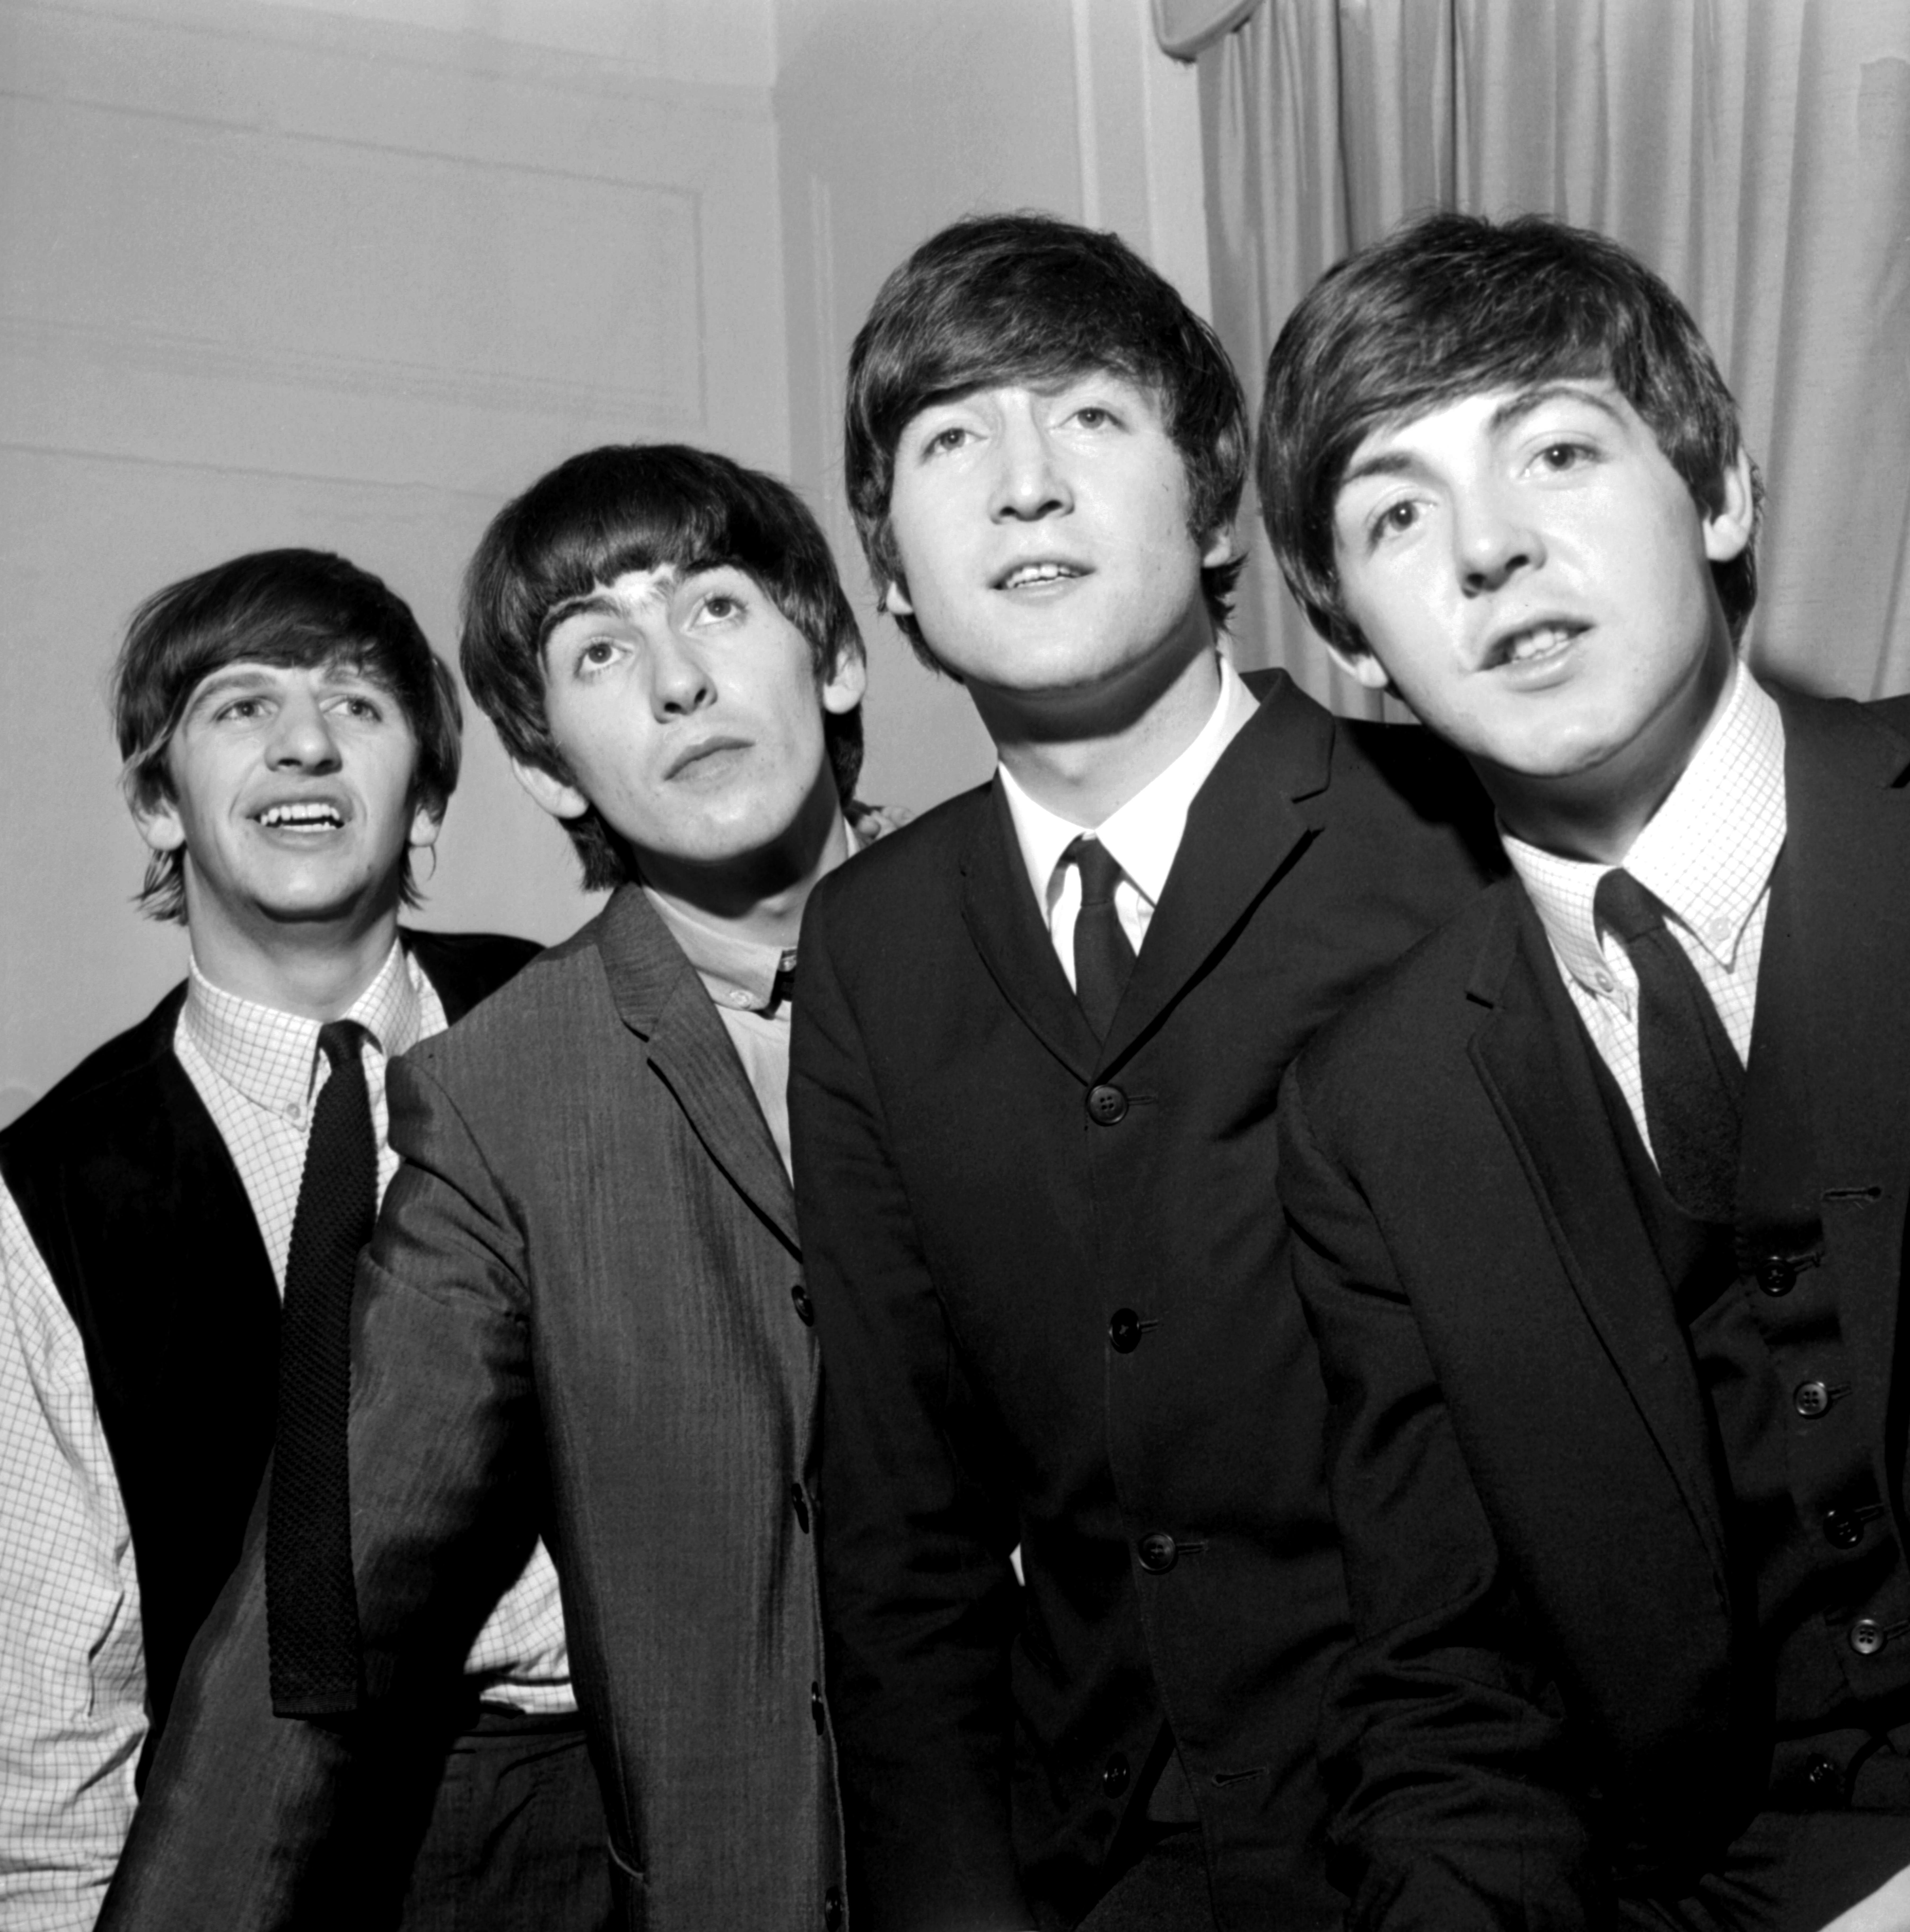 Unknown Portrait Photograph - The Beatles: Young and Smiling Globe Photos Fine Art Print